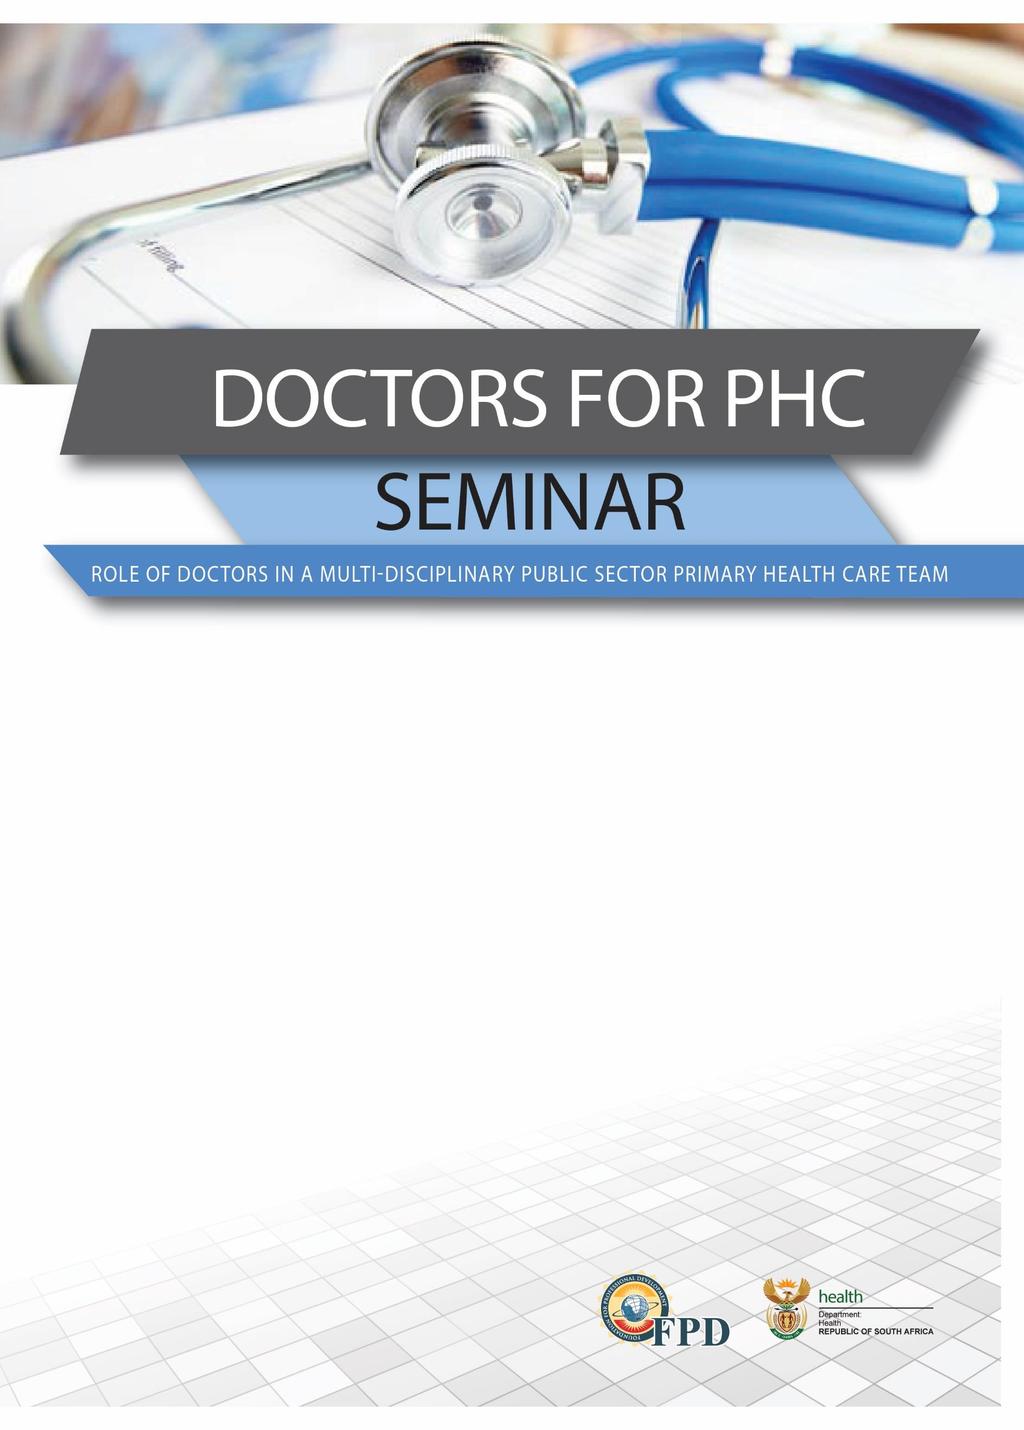 Report on the Doctors for Primary Health Care Symposium